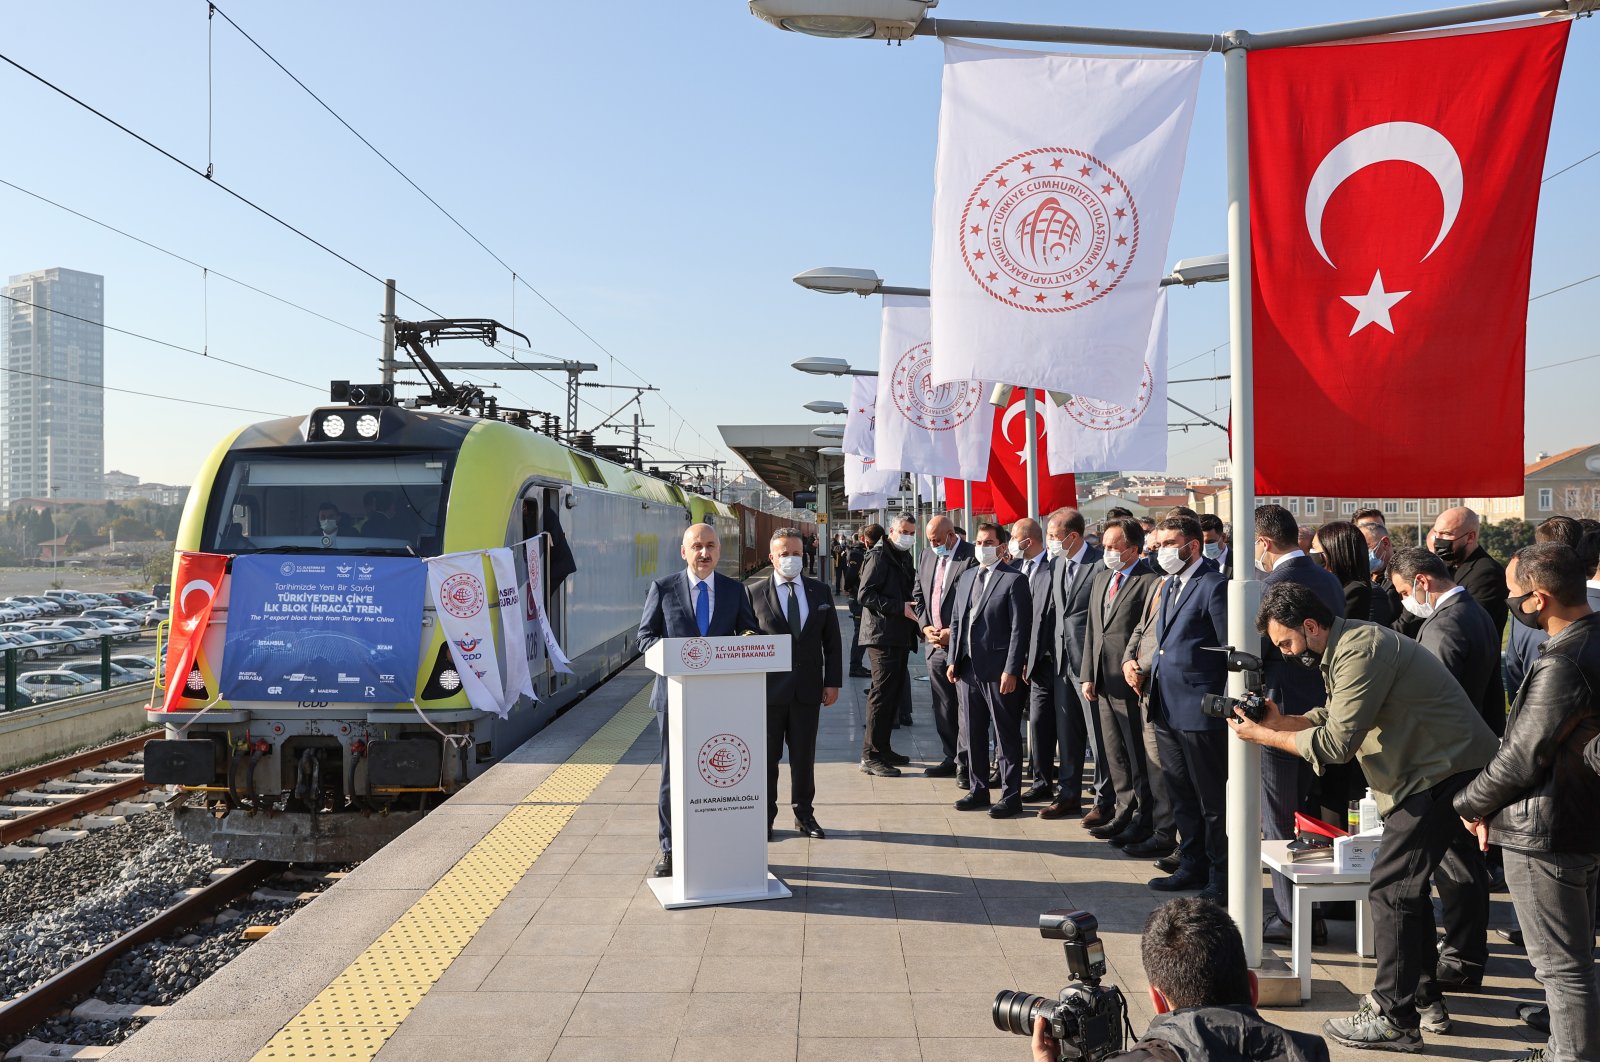 Transport and Infrastructure Minister Adil Karaismailoğlu delivers a speech during a sendoff ceremony for the first train, which will carry goods from Turkey to China, at the Kazlıçeşme station on the European side of Istanbul, Turkey, Dec. 4, 2020. (AA Photo)